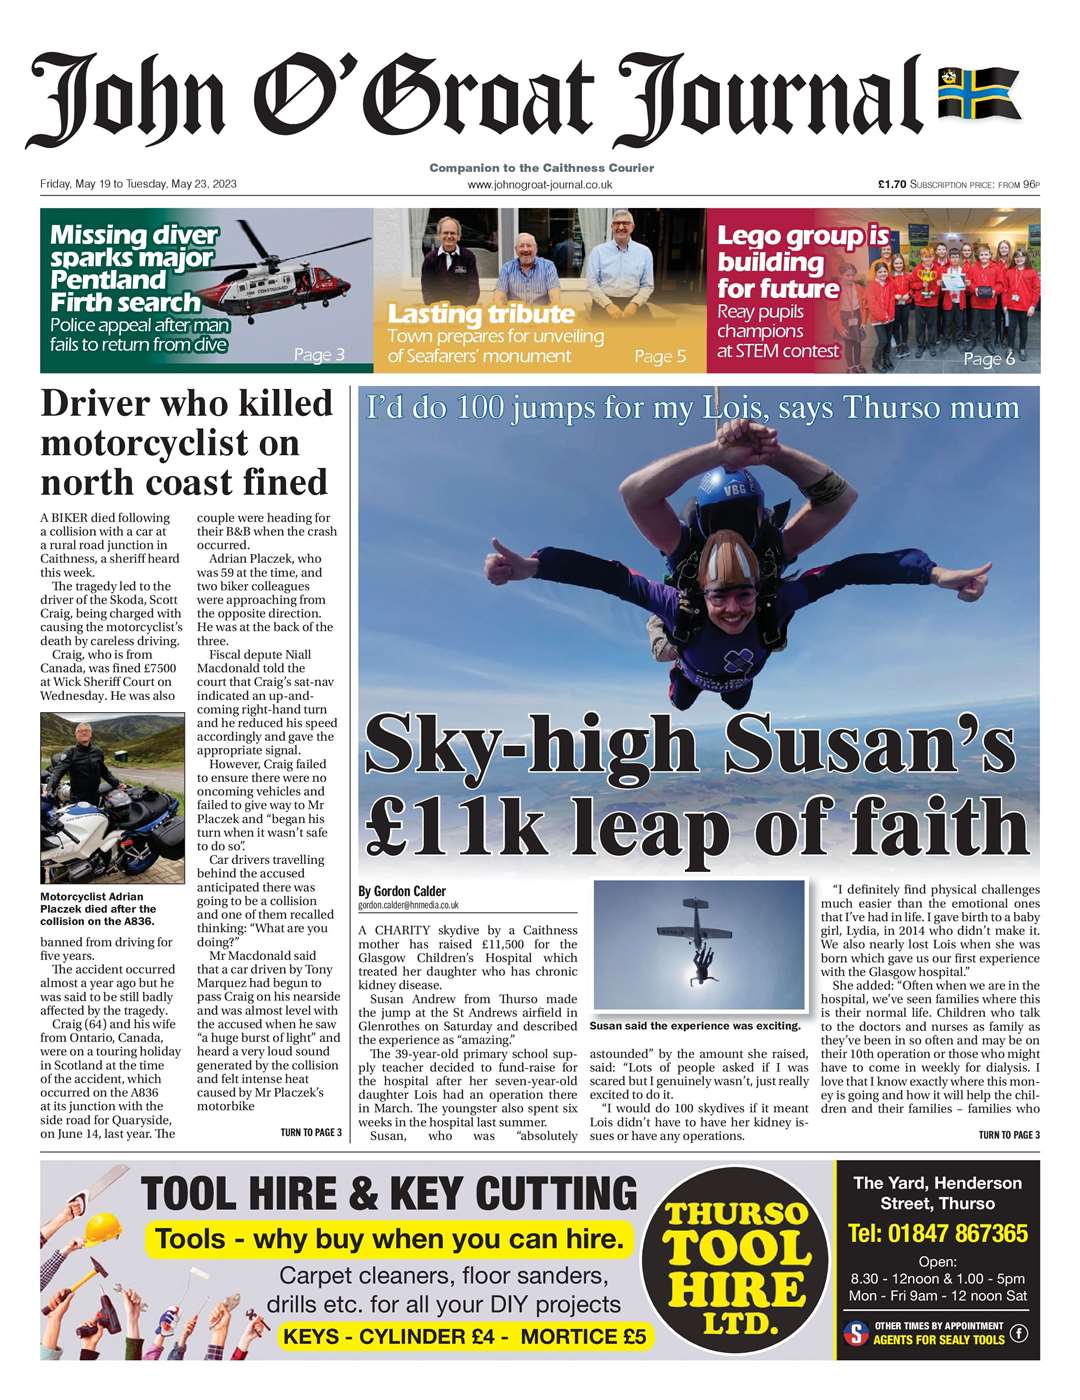 How we reported the skydive story in the John O'Groat Journal.